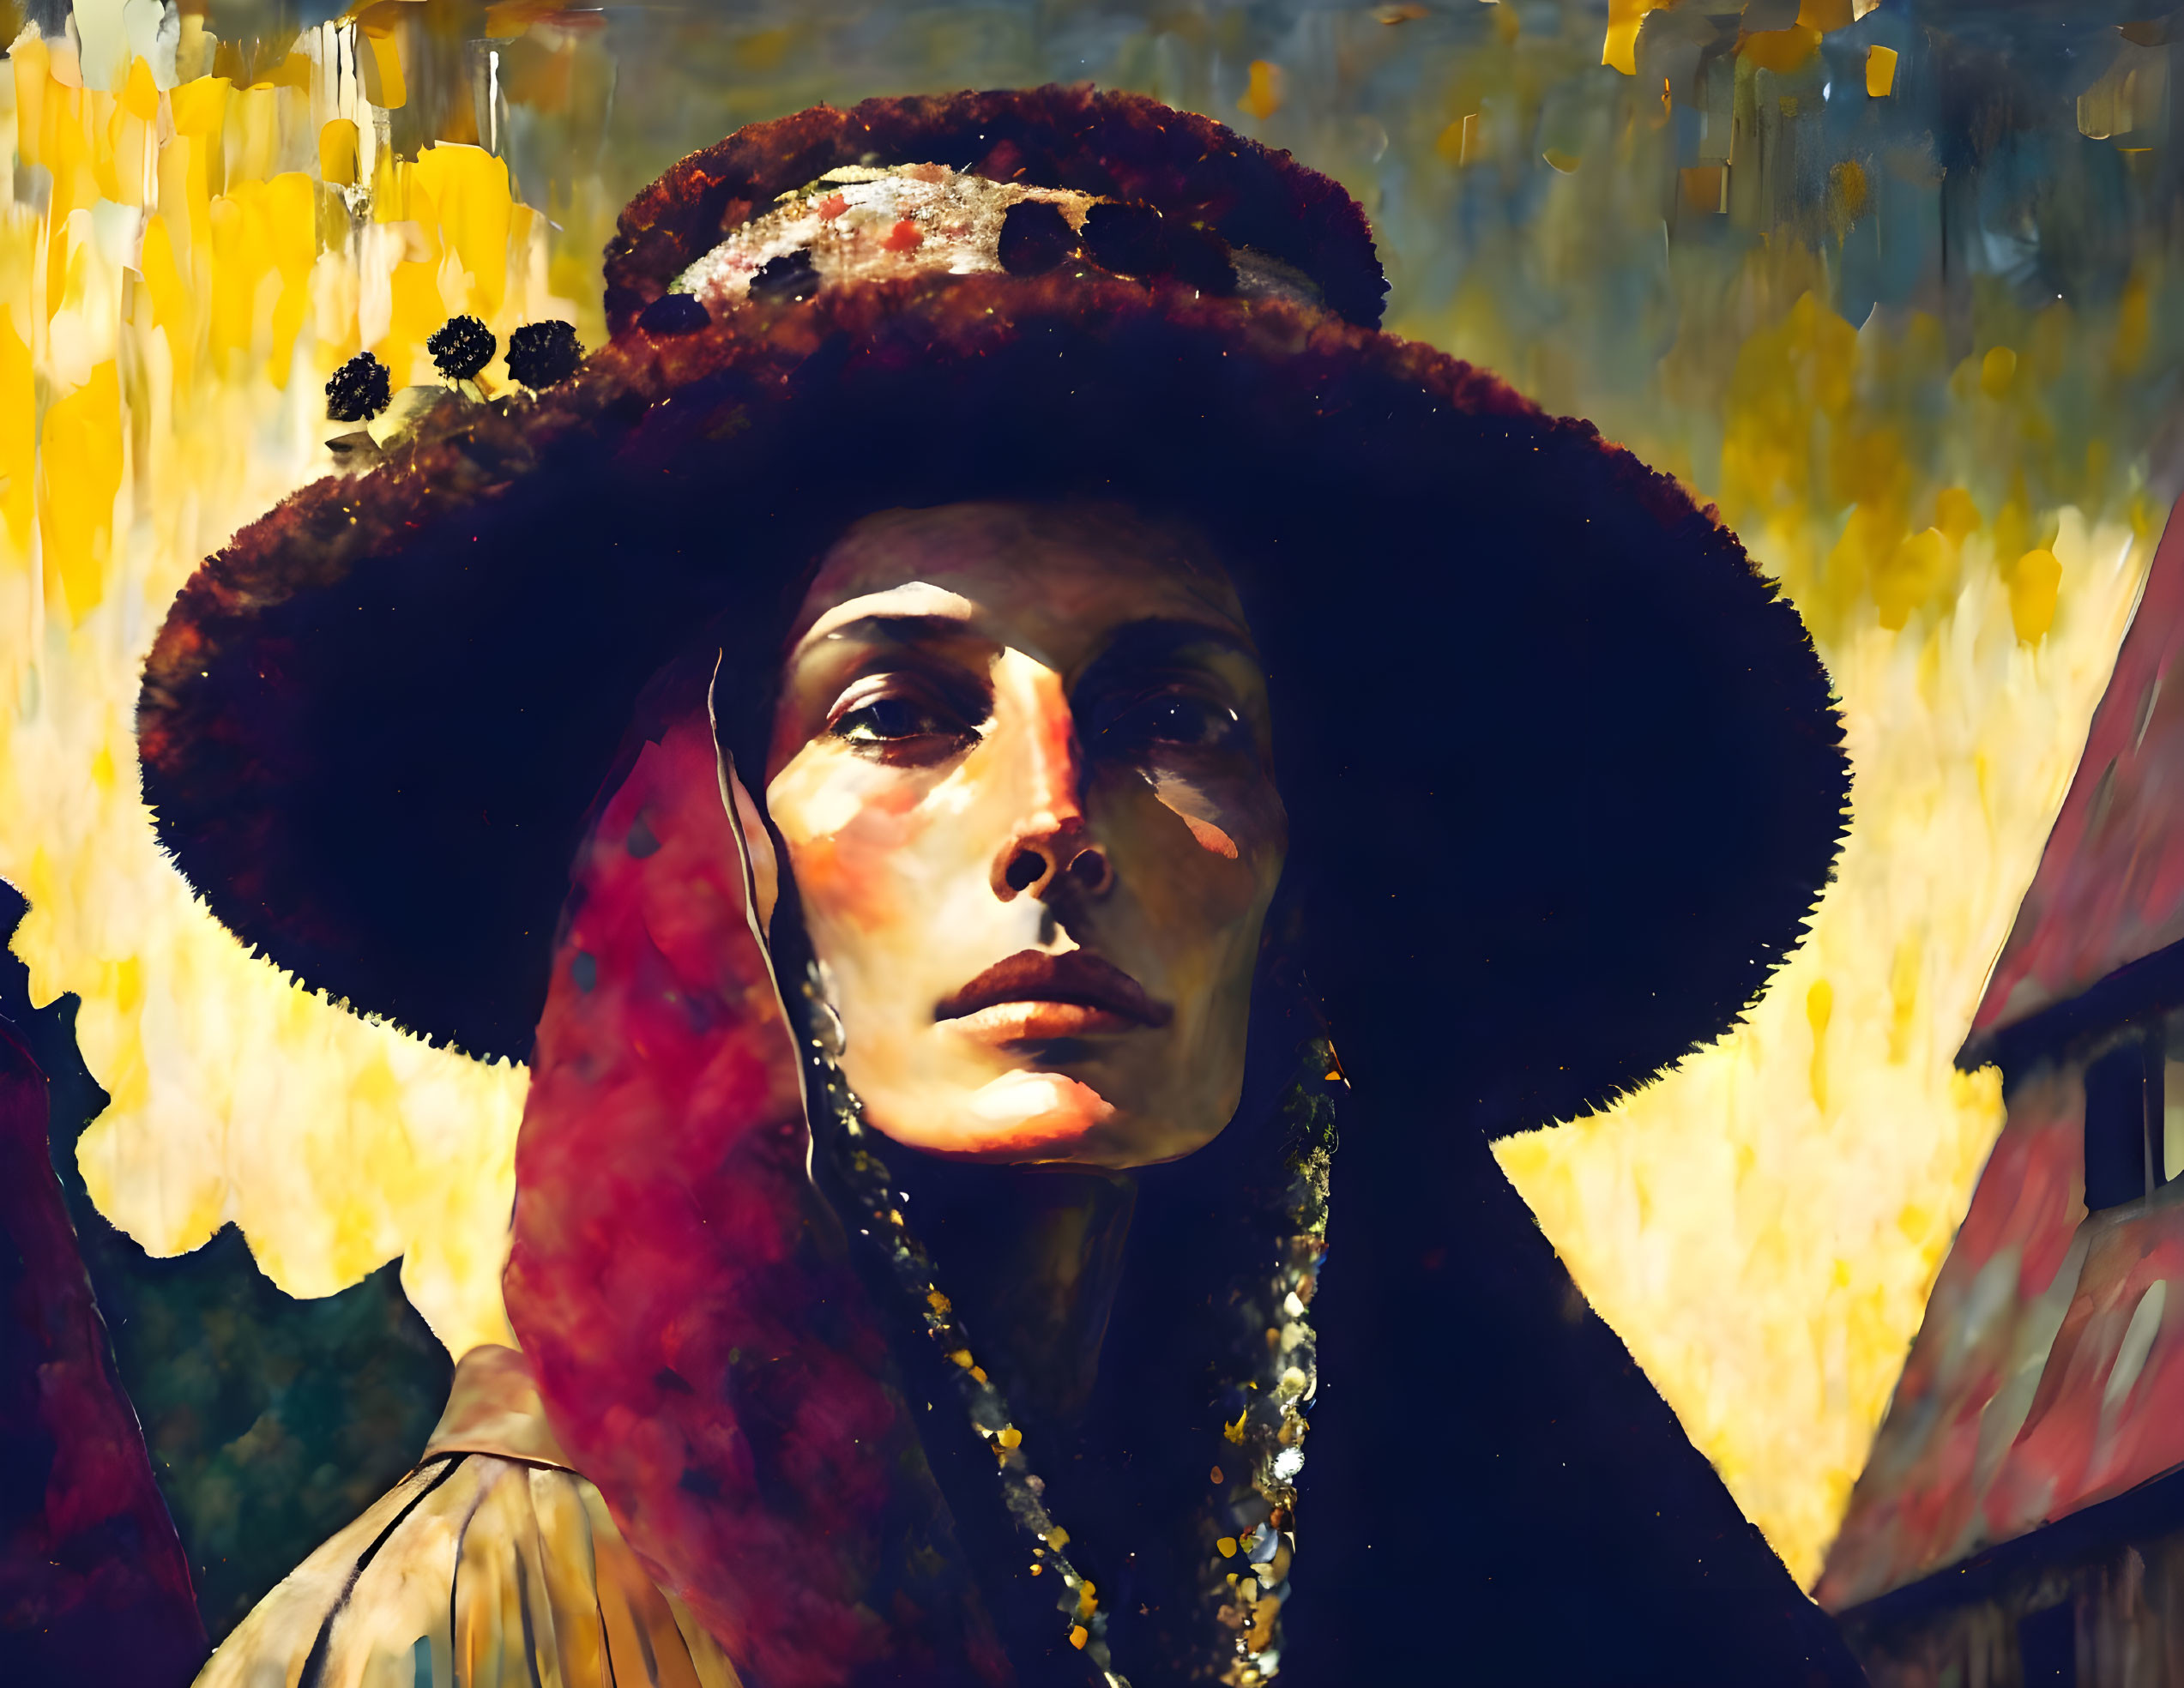 Vibrant portrait of a woman in wide-brimmed hat and scarf